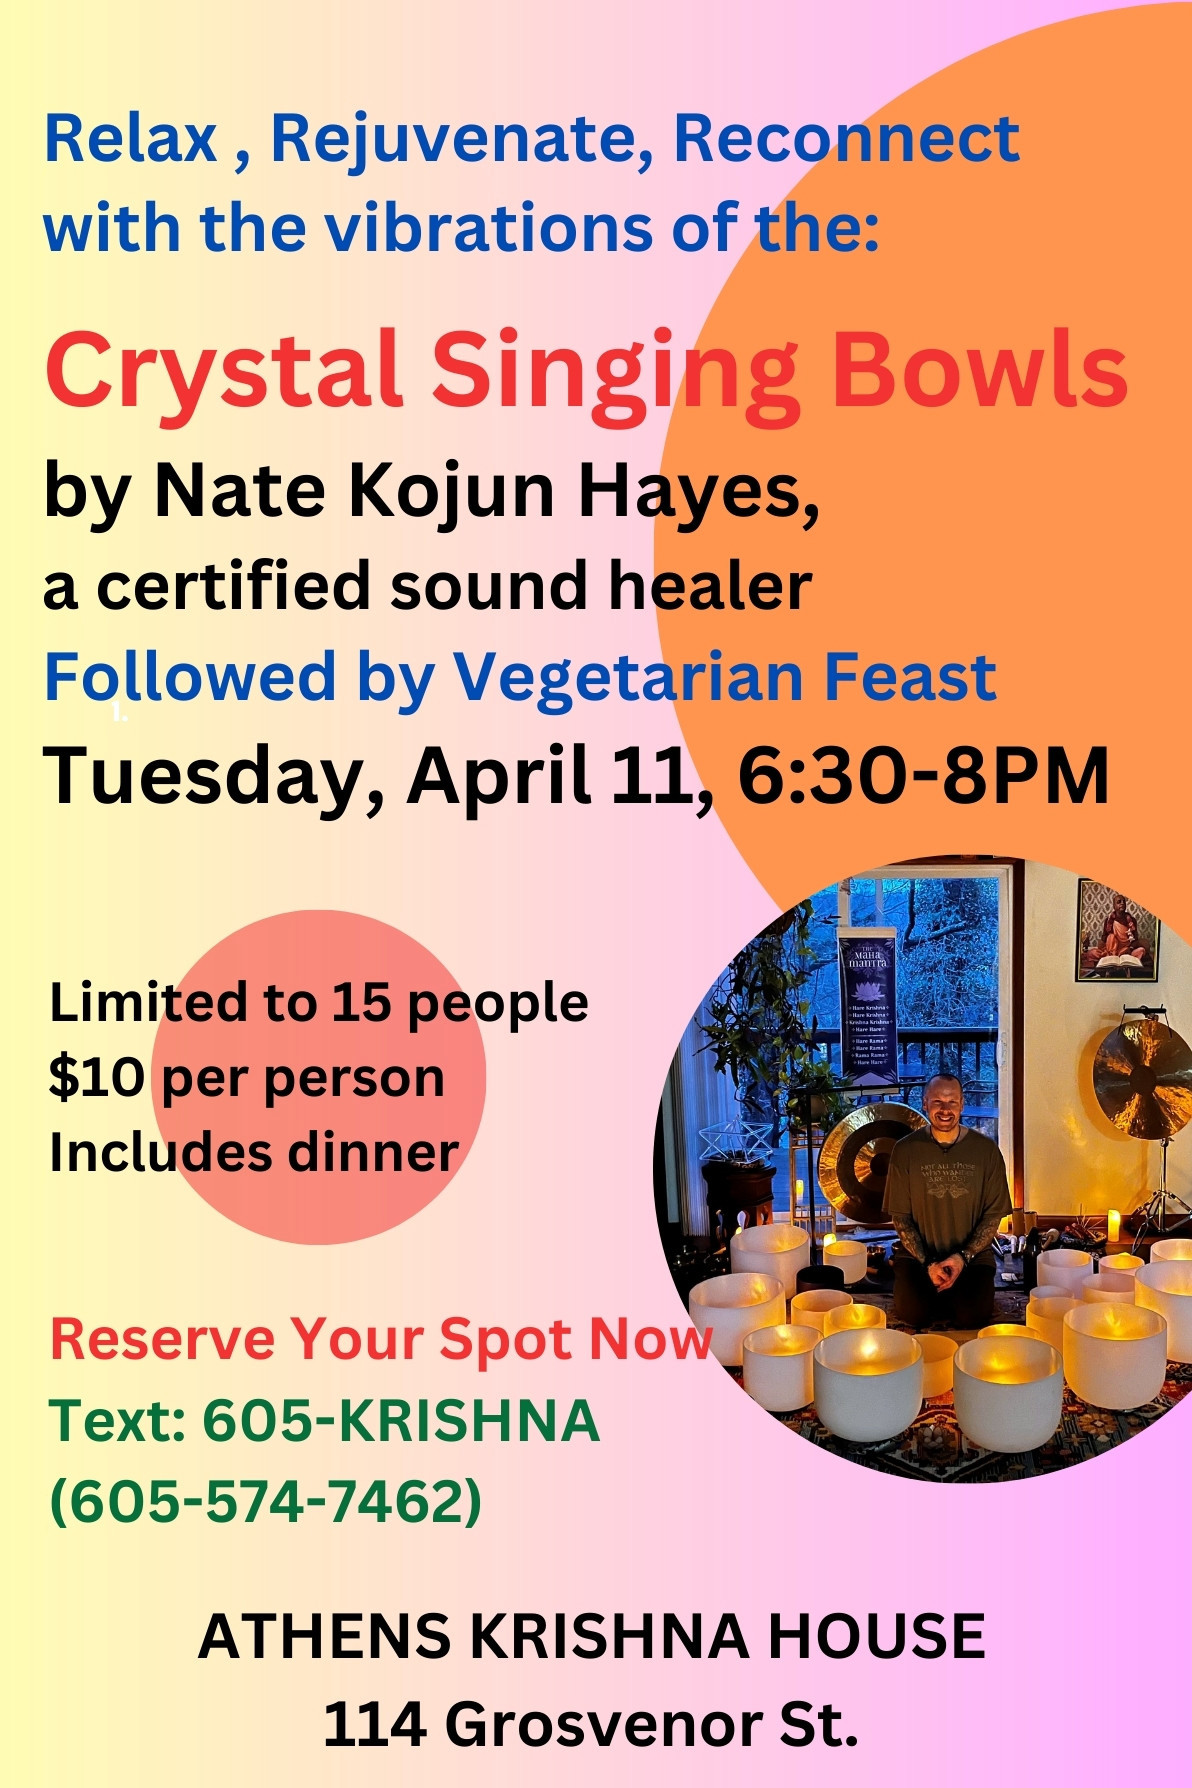 The image is a flyer for Athens Krishna House. The text reads:Relax, rejuvenate, reconnect with the vibrations of the crystal singing bowls by Nate Cajun Hayes, a certified sound healer. Followed by Vegetarian Feast. Tuesday, April 11 6:30 p.m. - 8 p.m. Limited to 15 people. $10 per person includes dinner. Reserve your spot now: text 605-Krishna